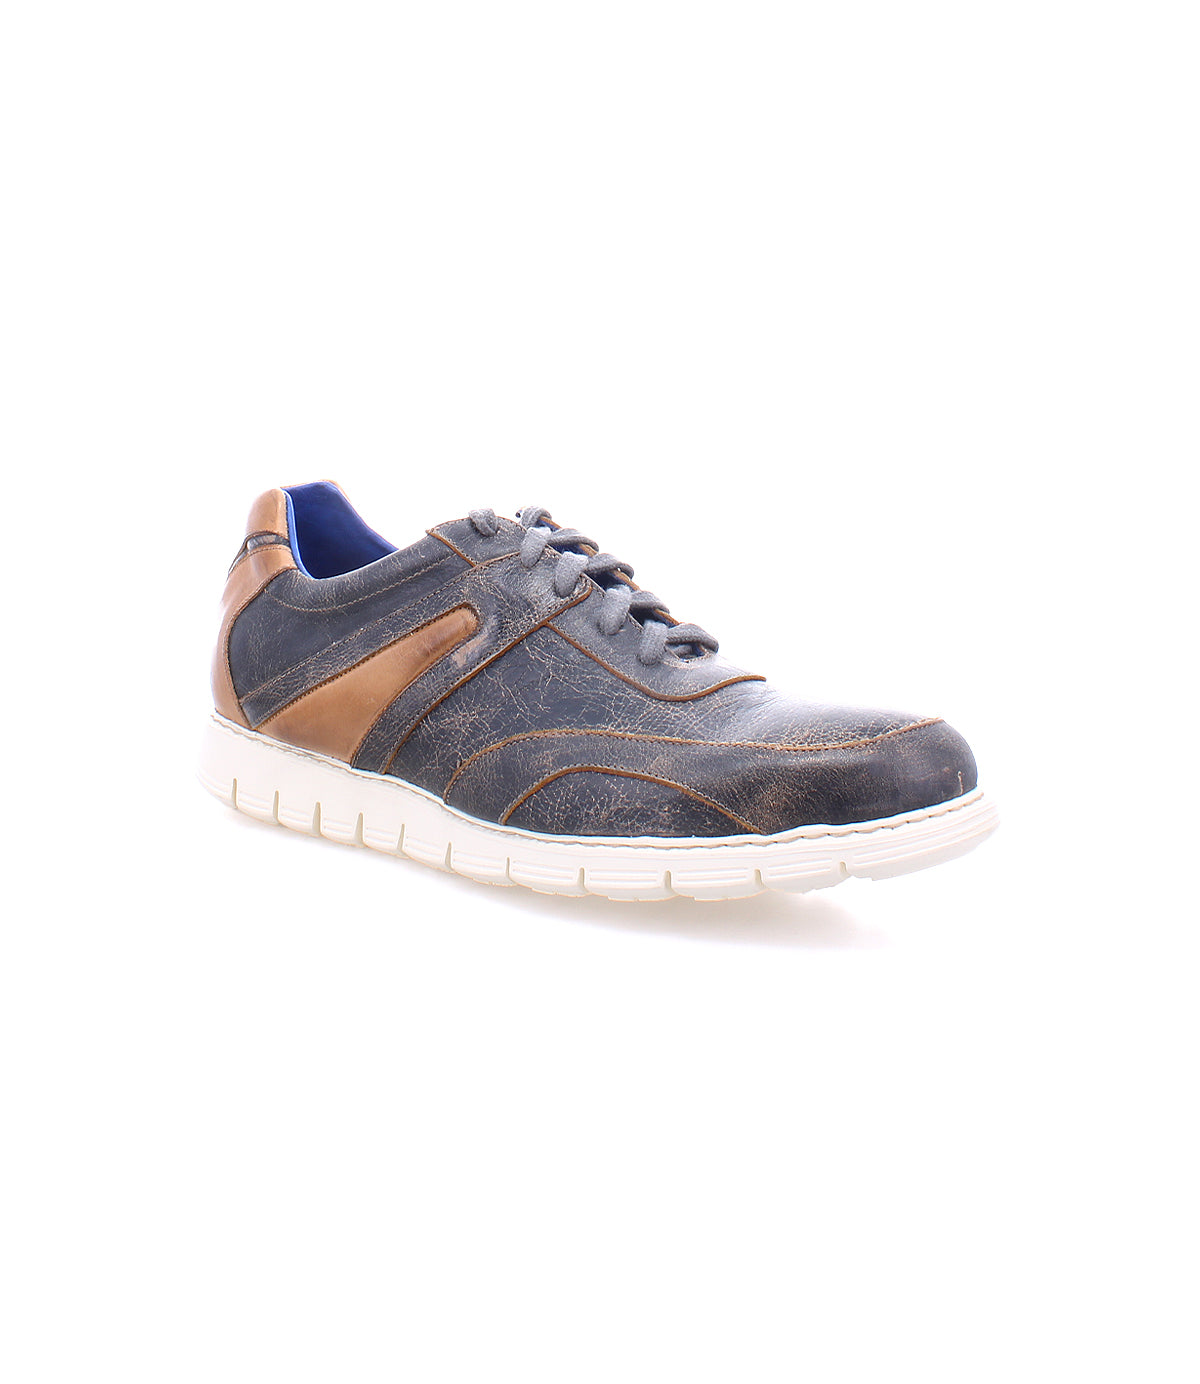 A comfortable pair of Bed Stu Wardell men's lace-up shoes in blue and brown.